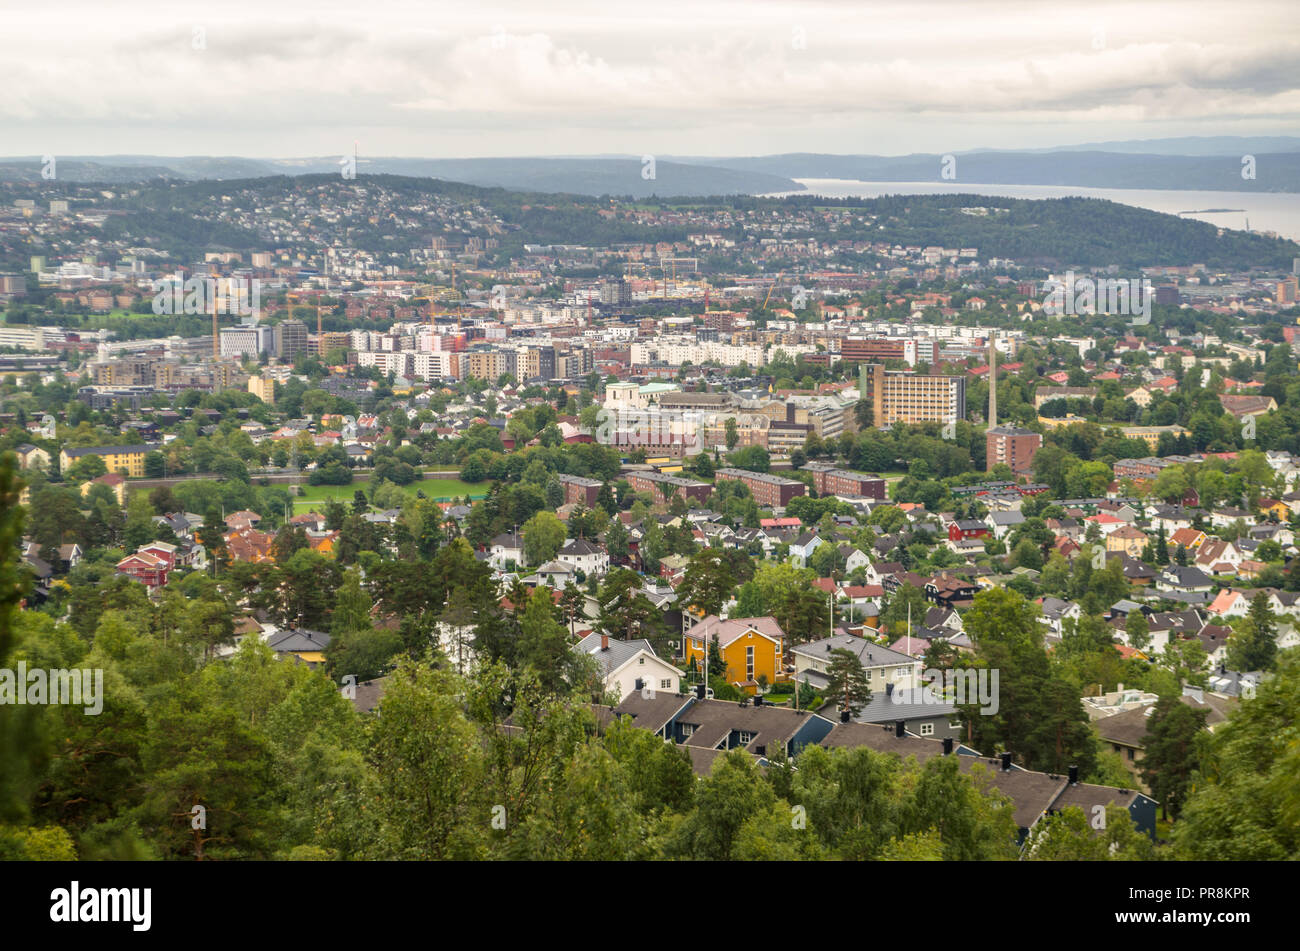 High populated area of Oslo, Norway. Stock Photo